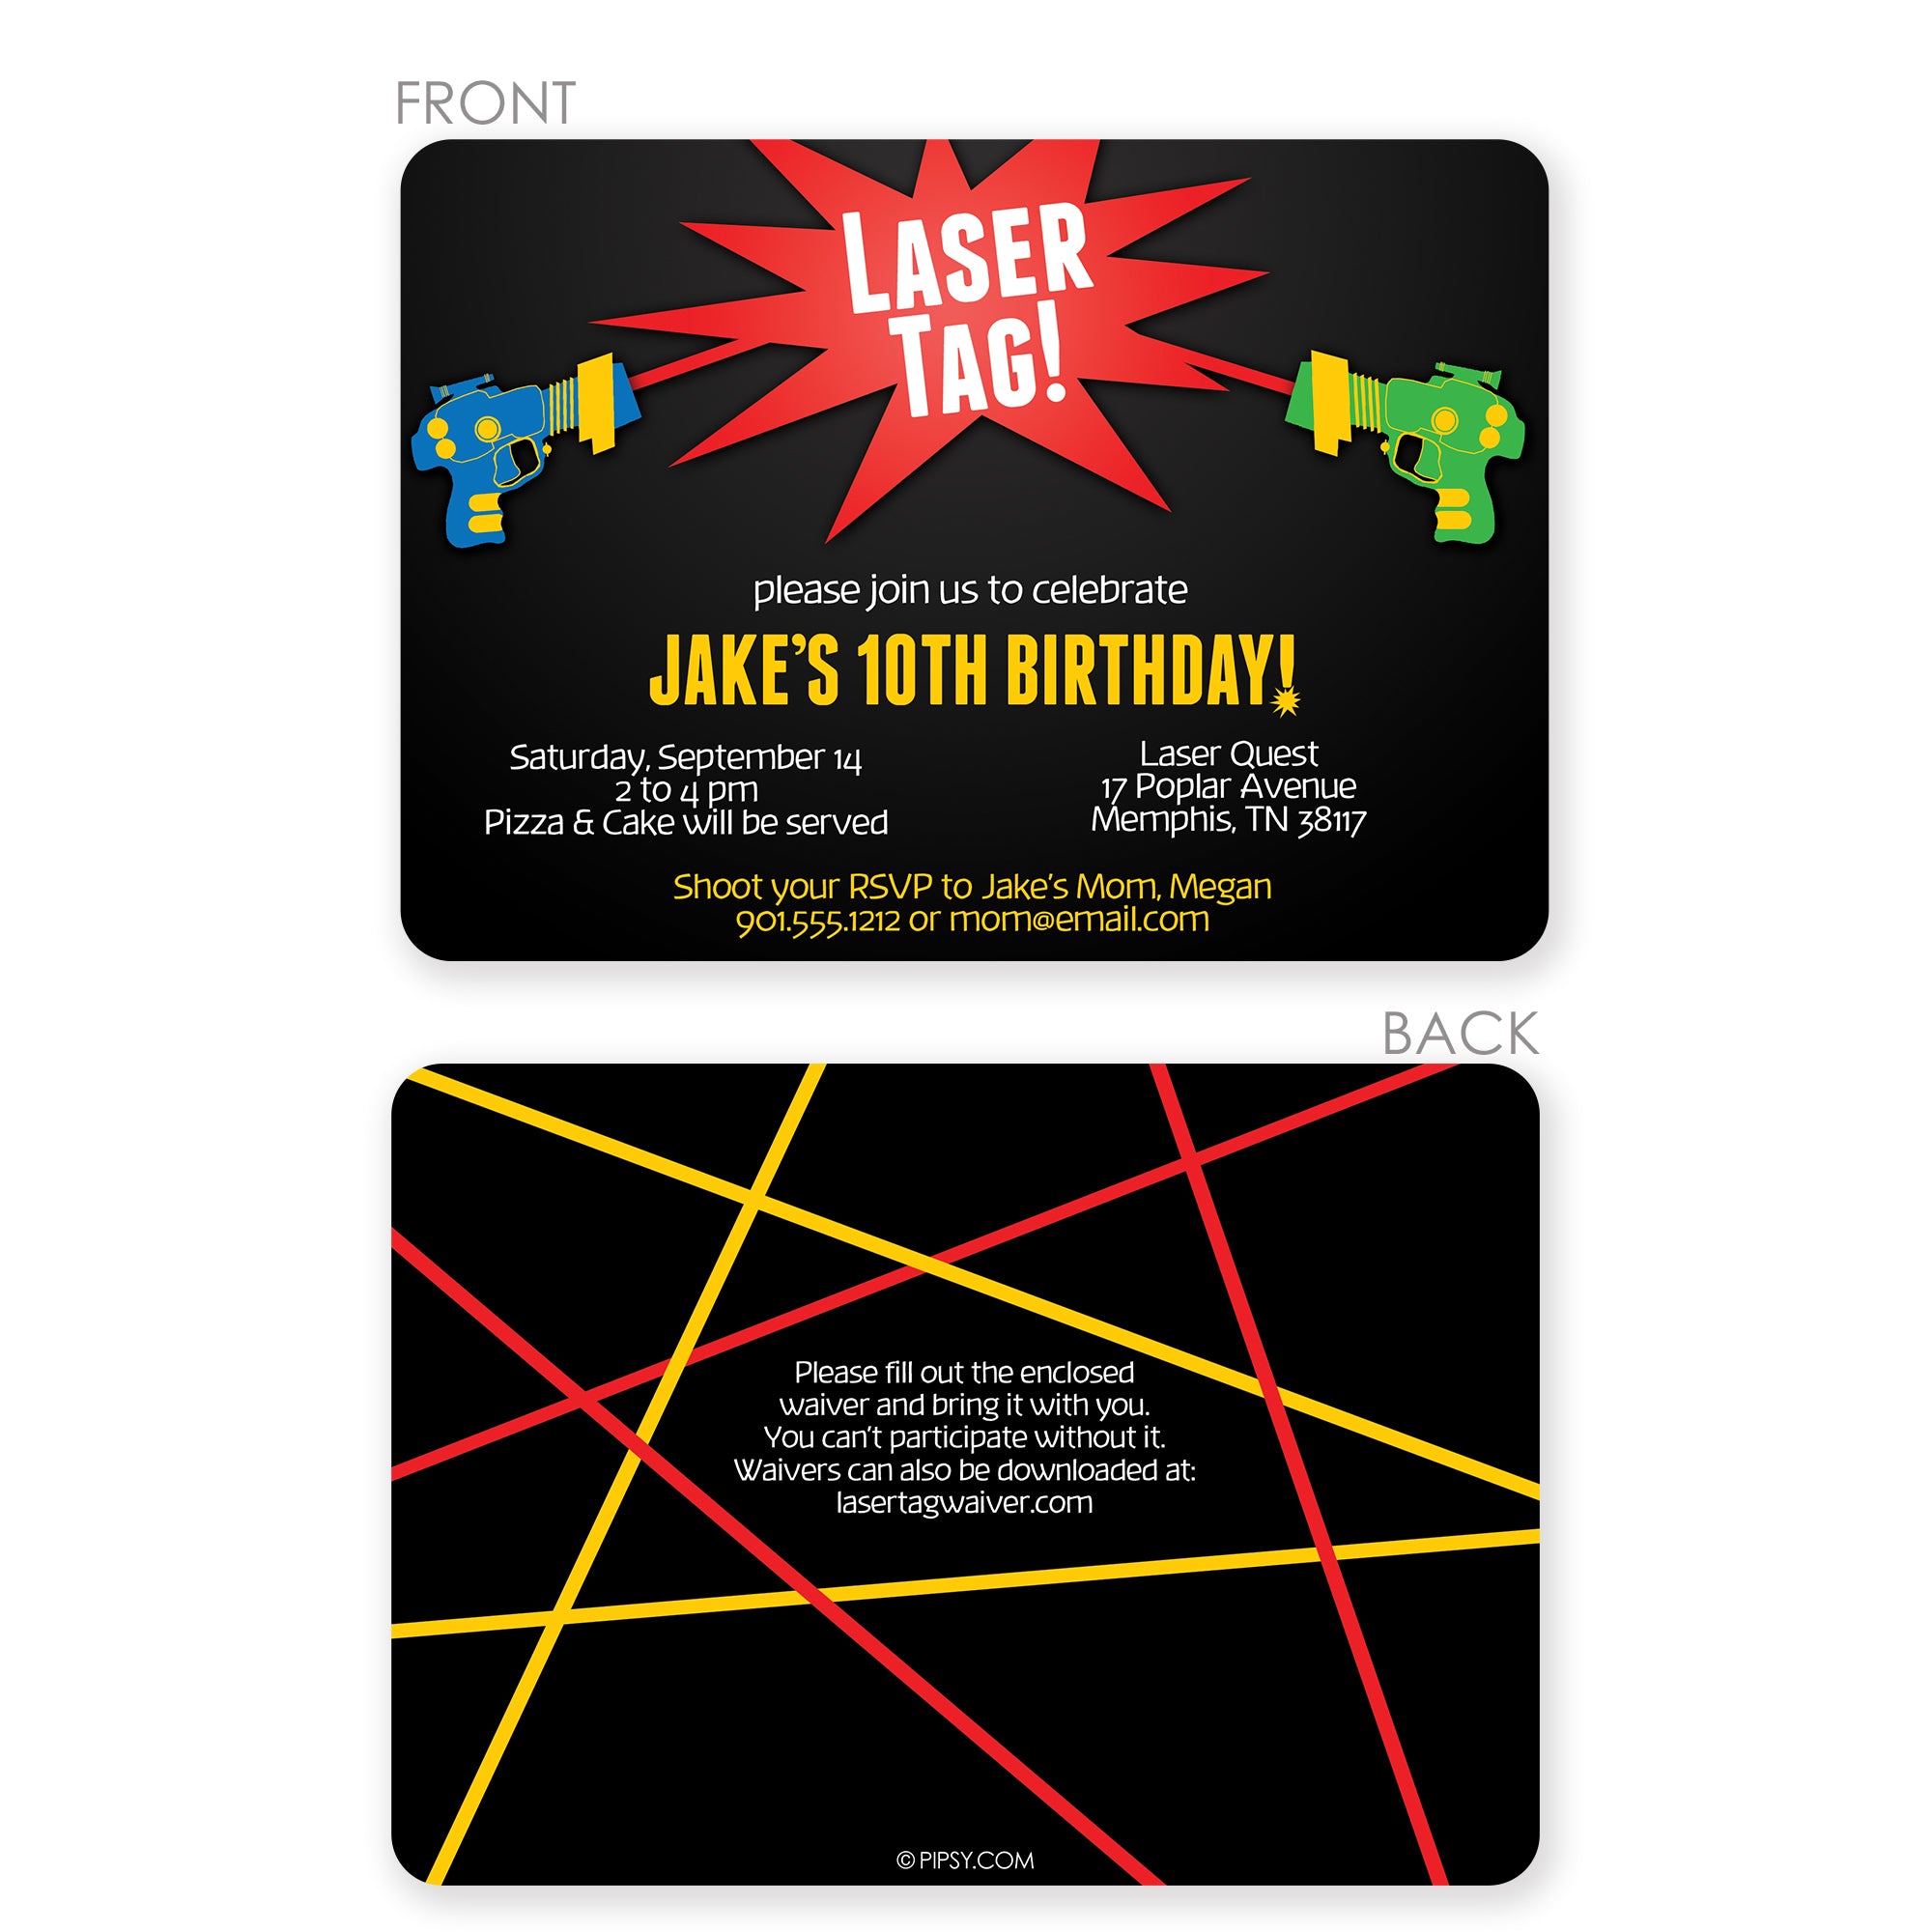 Laser Tag Birthday Invitations, printed on thick cardstock with 2-sided printing. Envelopes and a free proof are included